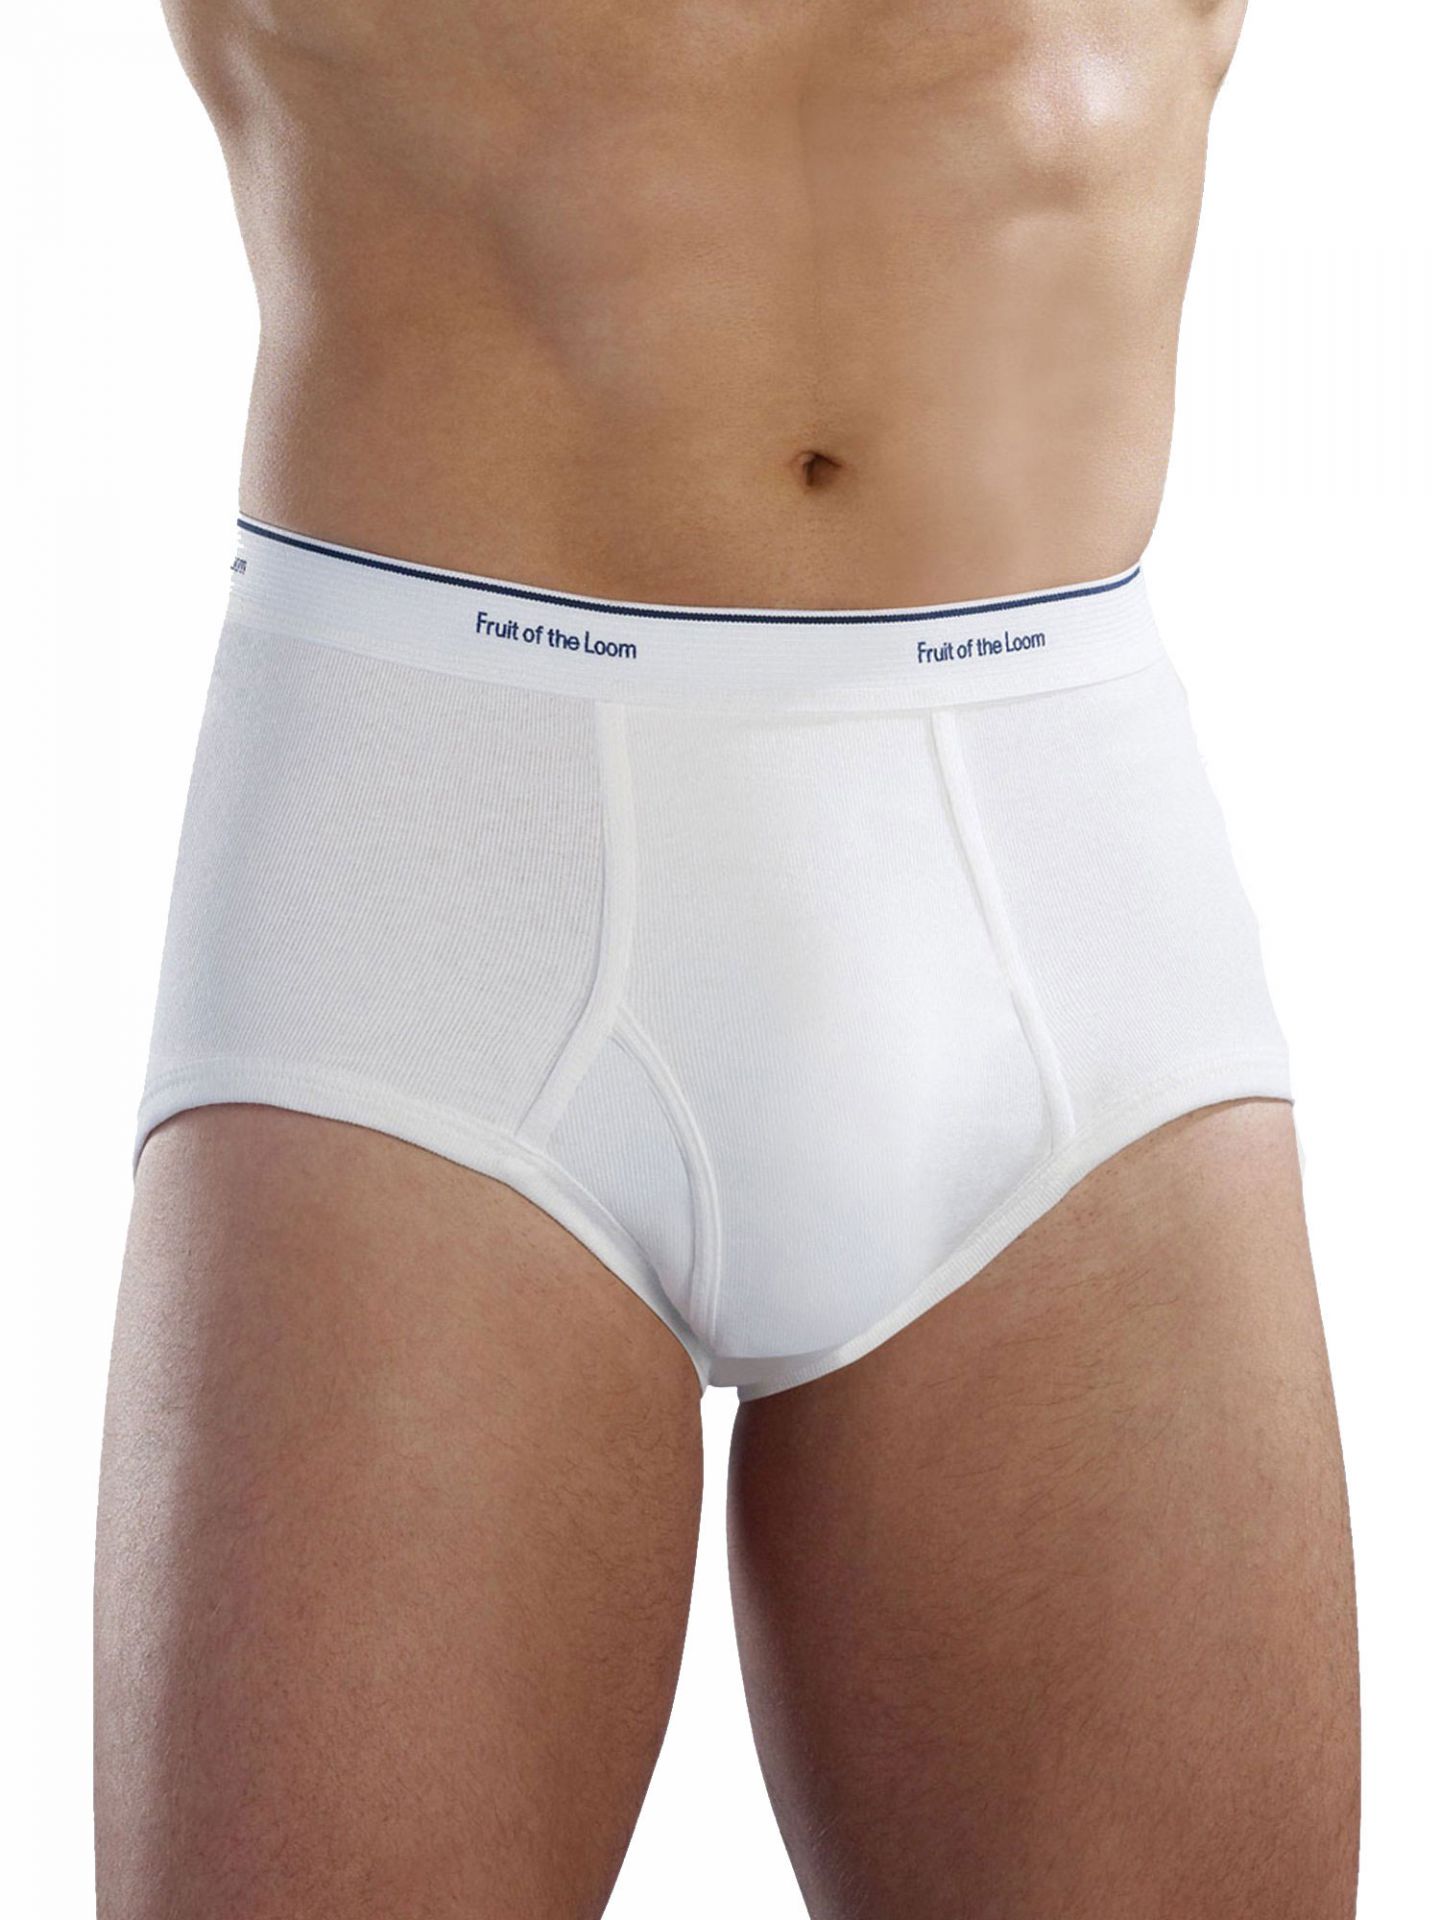 Fruit Of The Loom Men's Cotton Briefs Extended Sizes - White (Pack of 6)  for sale online